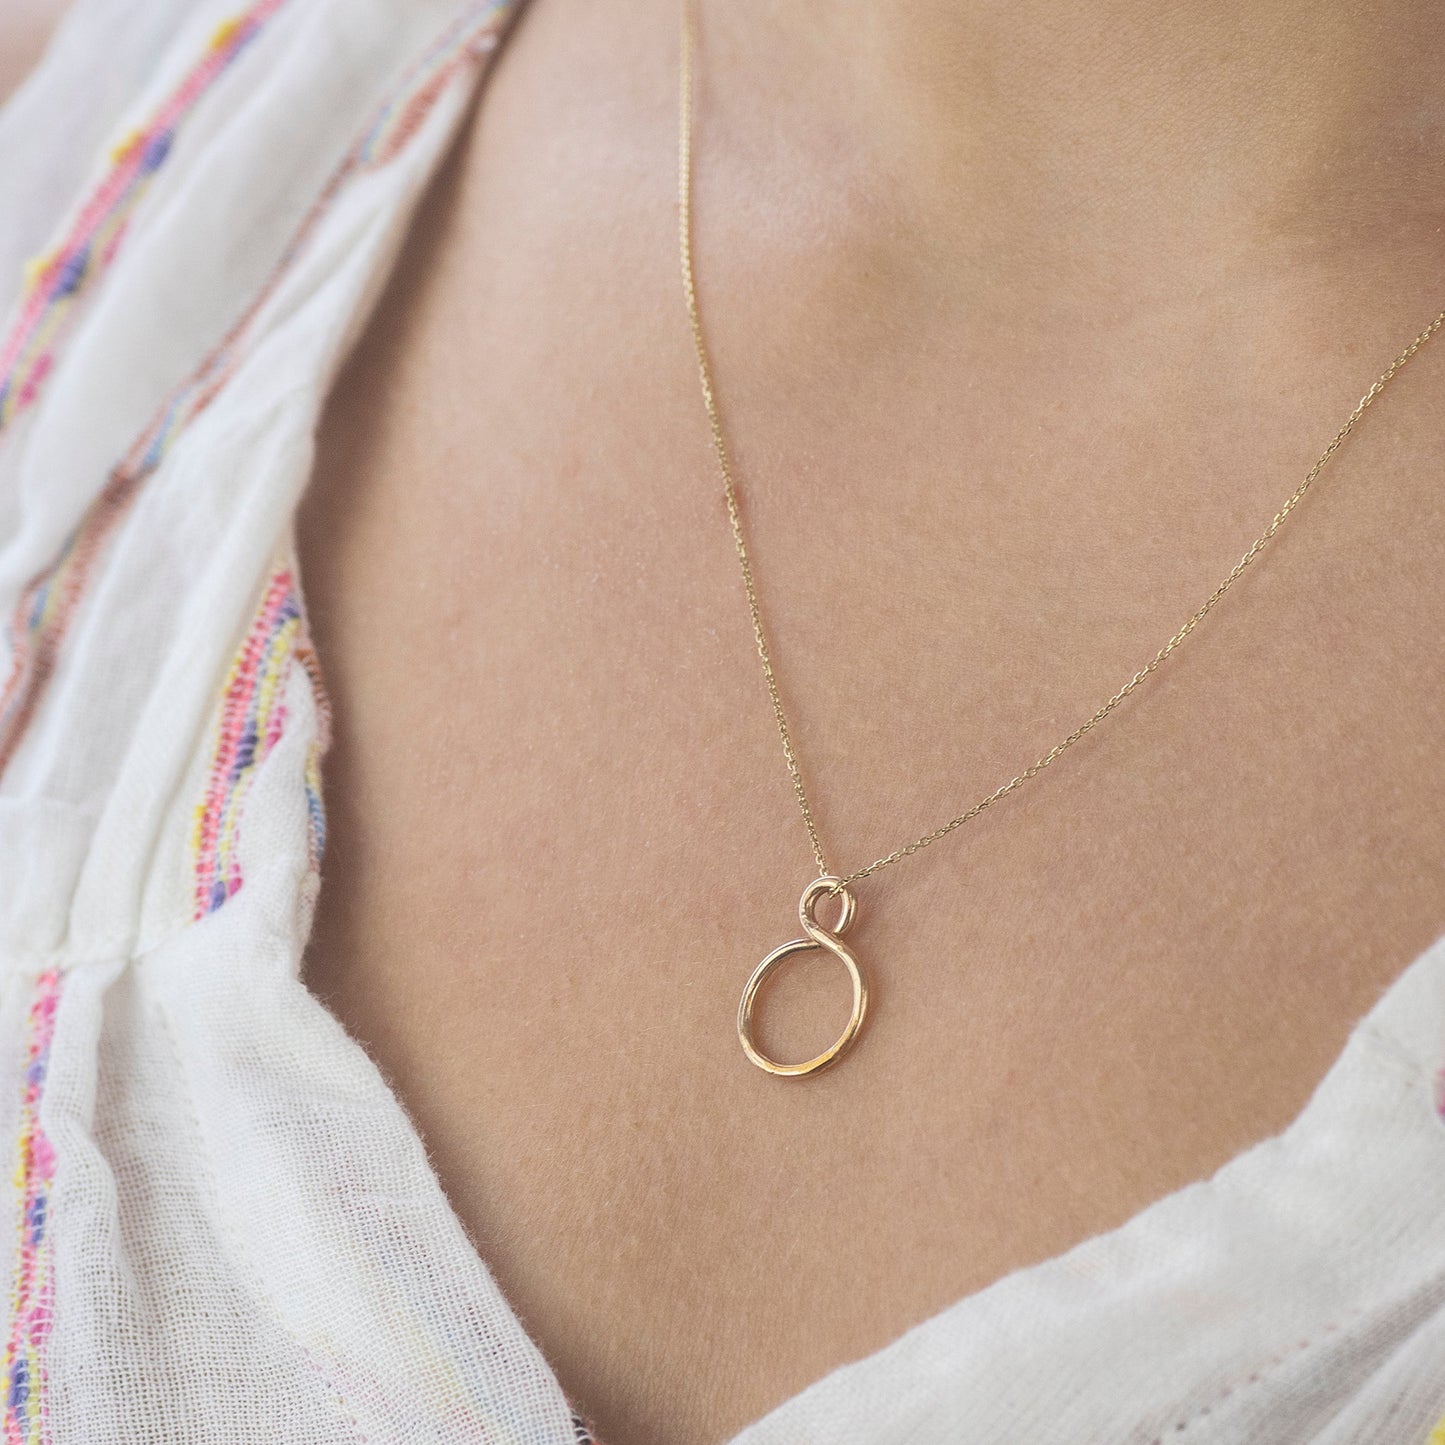 Gift for Niece - Tiny Infinity Necklace - 9kt Gold